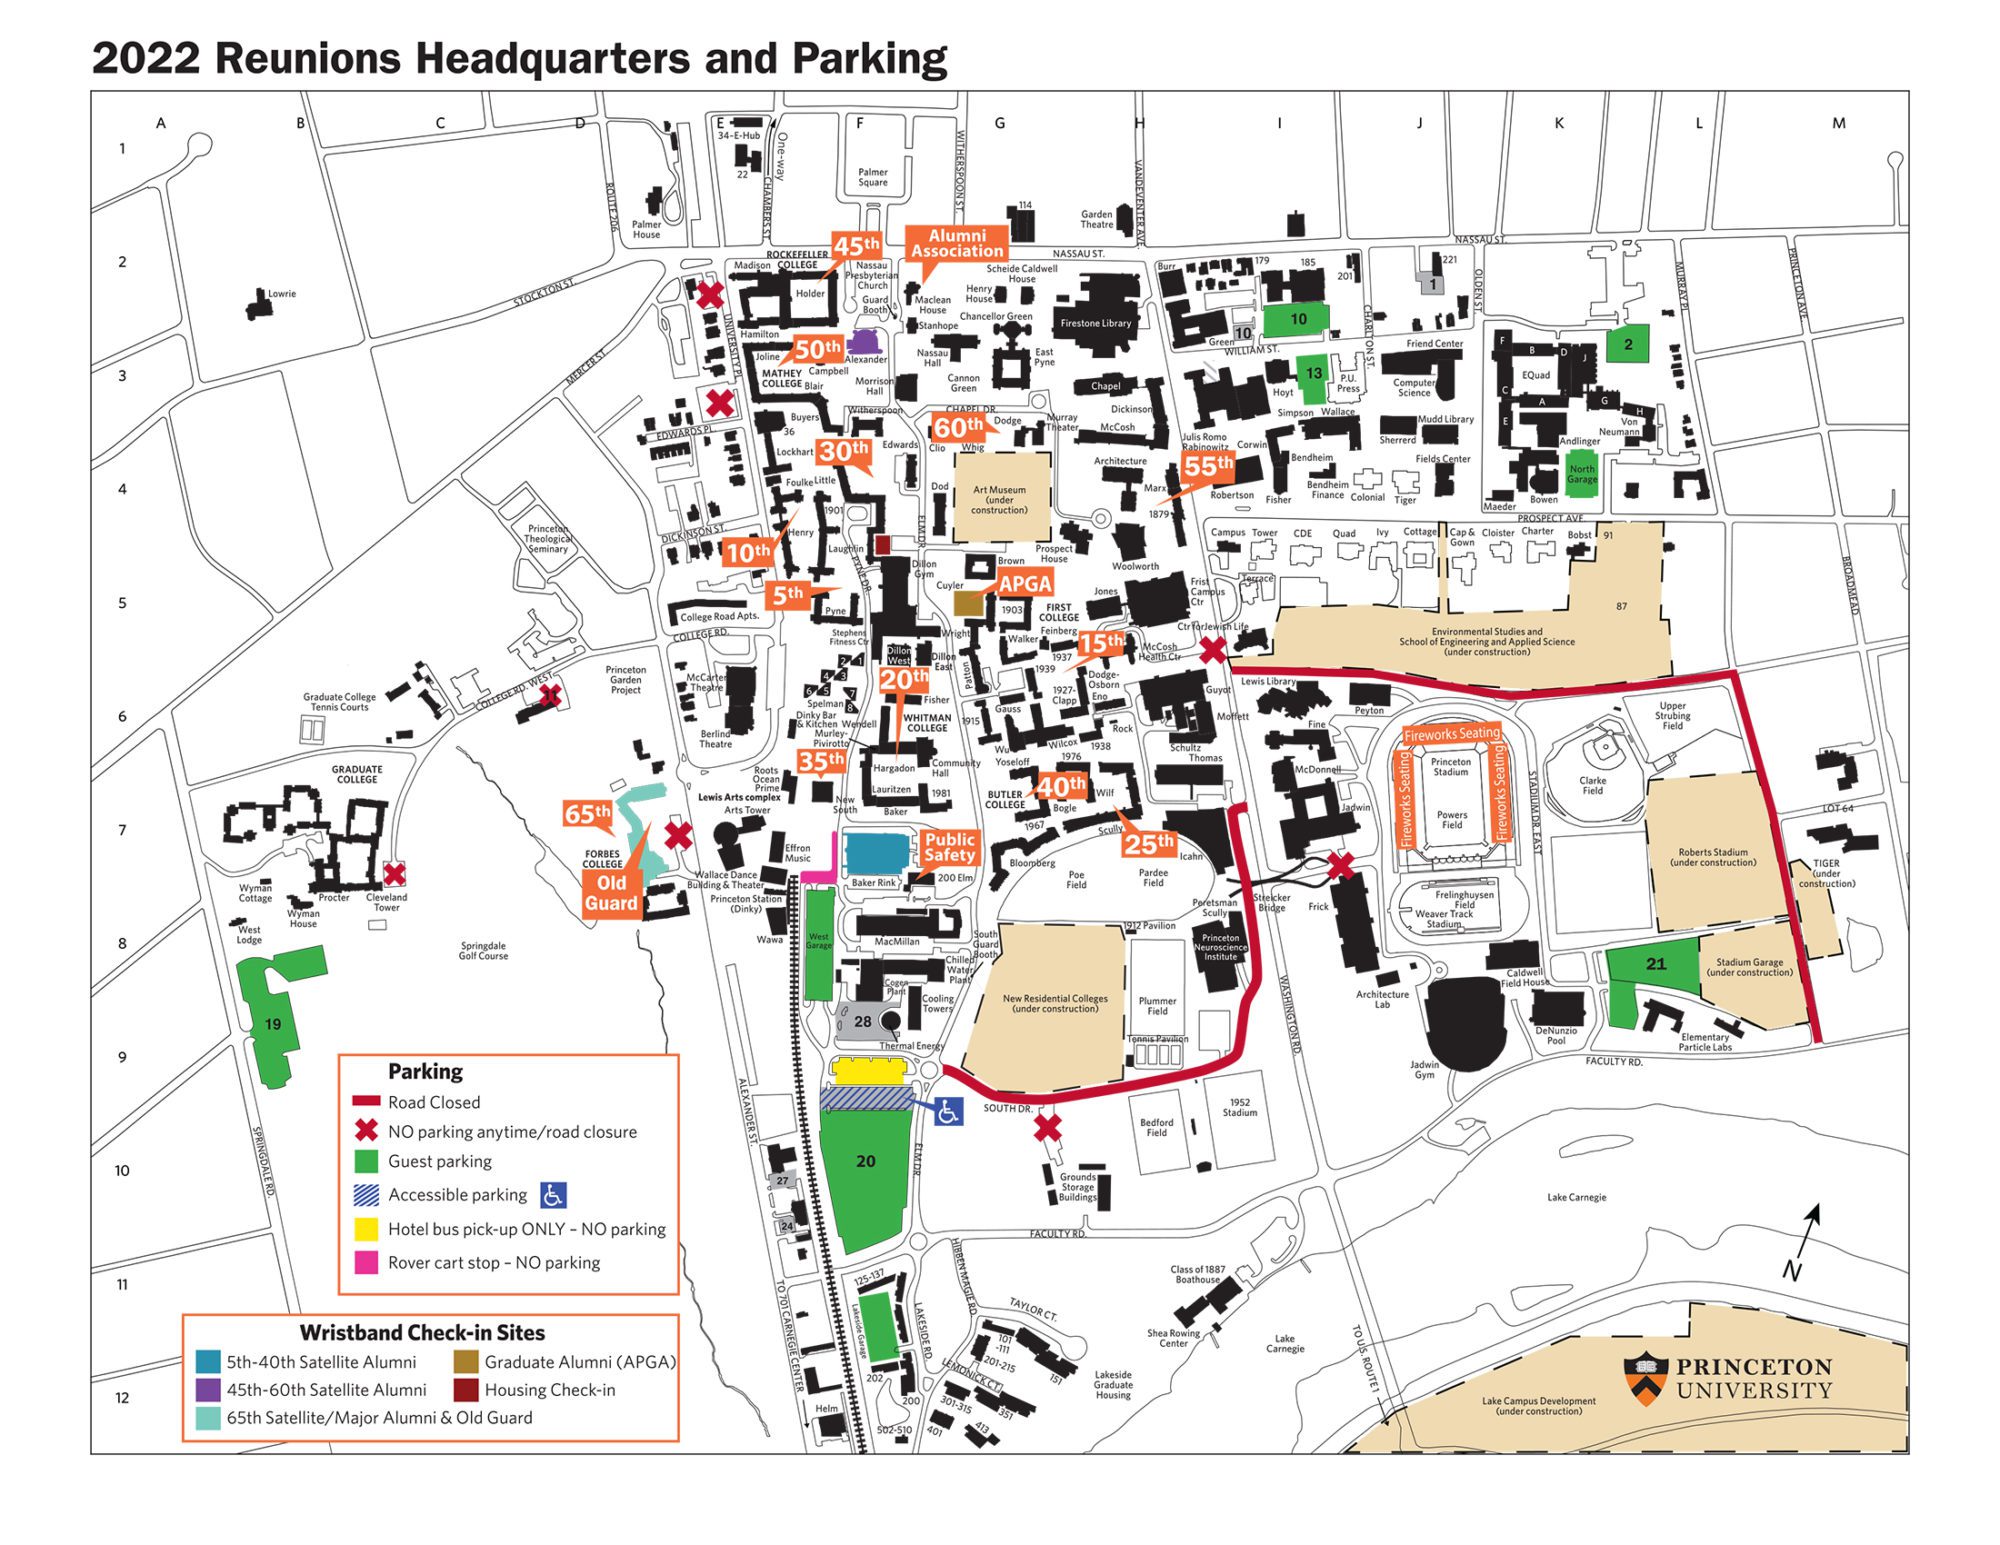 Reunions HQ and Parking-Transportation Map